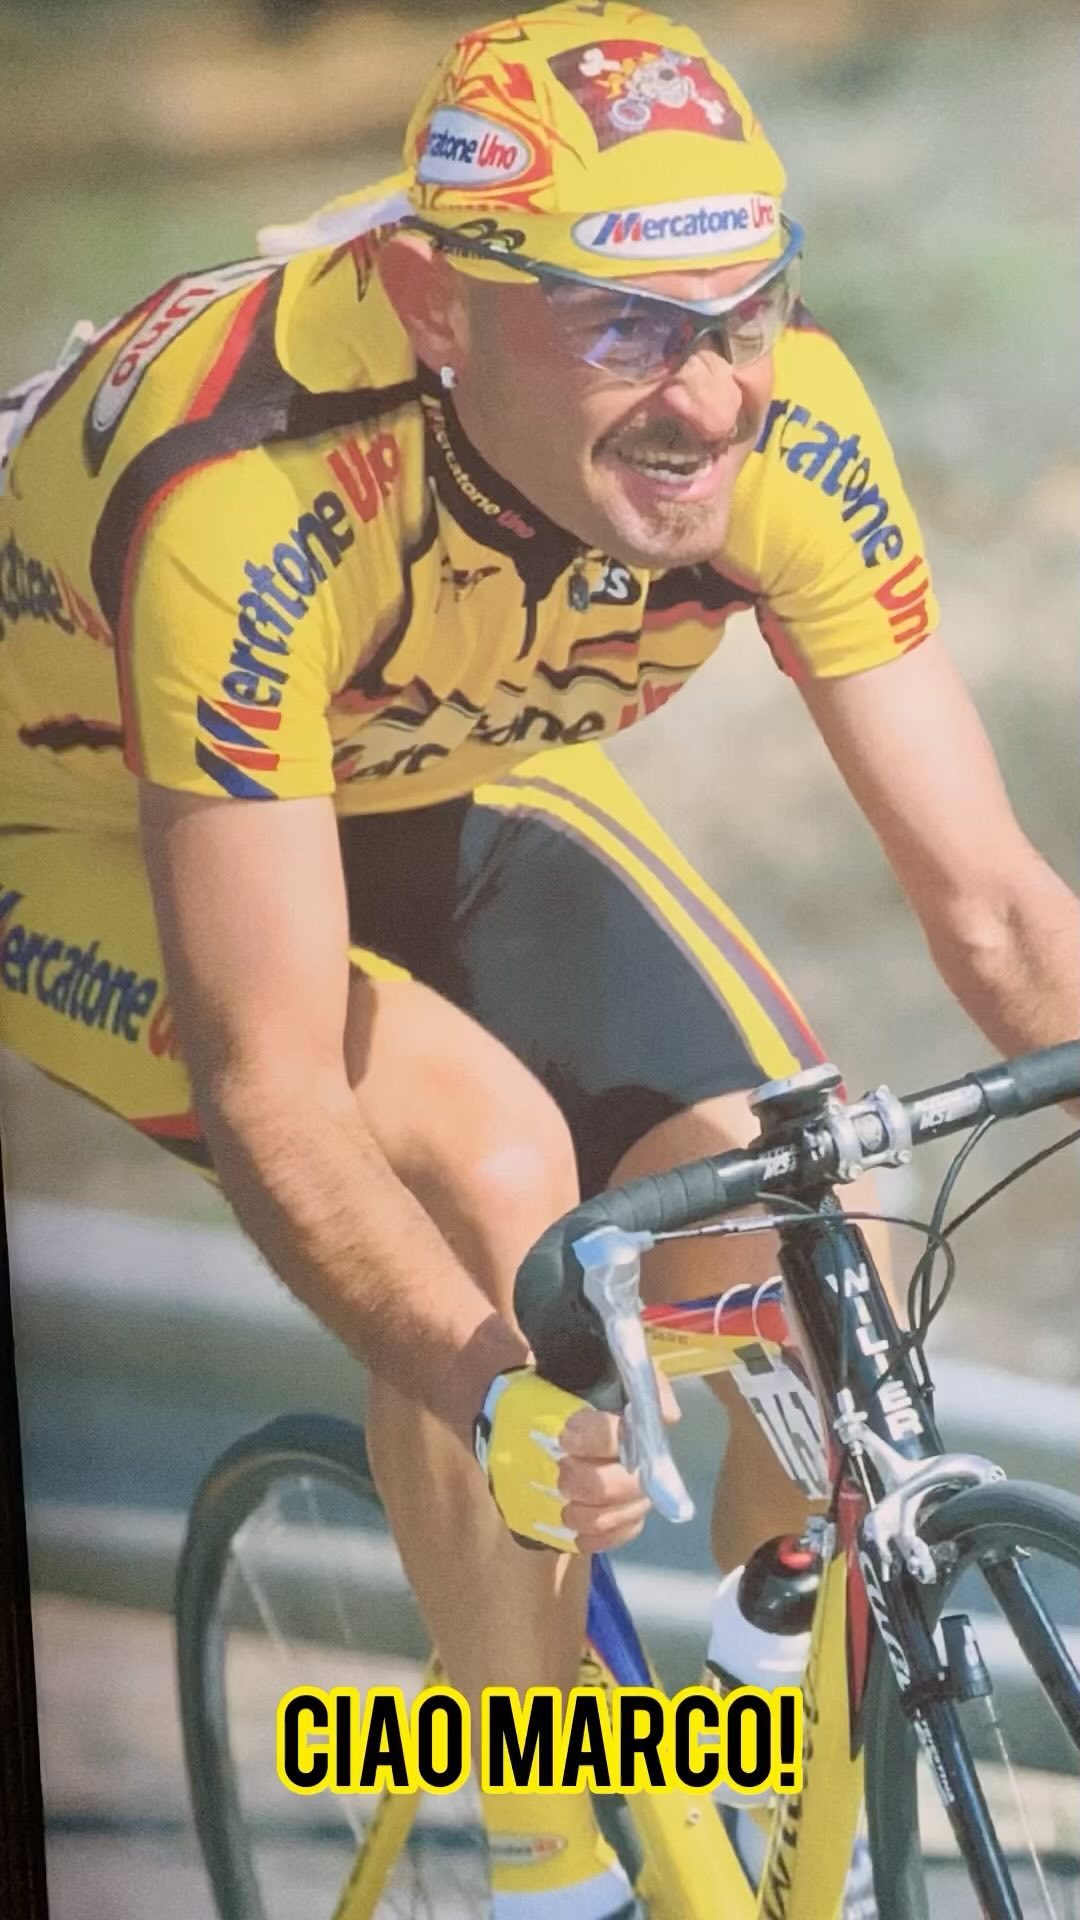 Today we were in #cesentatico and we visited #pantani museum. It’s always a bitter sweet sensation to talk about his story. 
We grew up watching his ups and downs. Great heart and legs and a fragile soul.
We miss you #pirata

#marcopantani #sicilycyclingclub #sicily #cyclingtravel